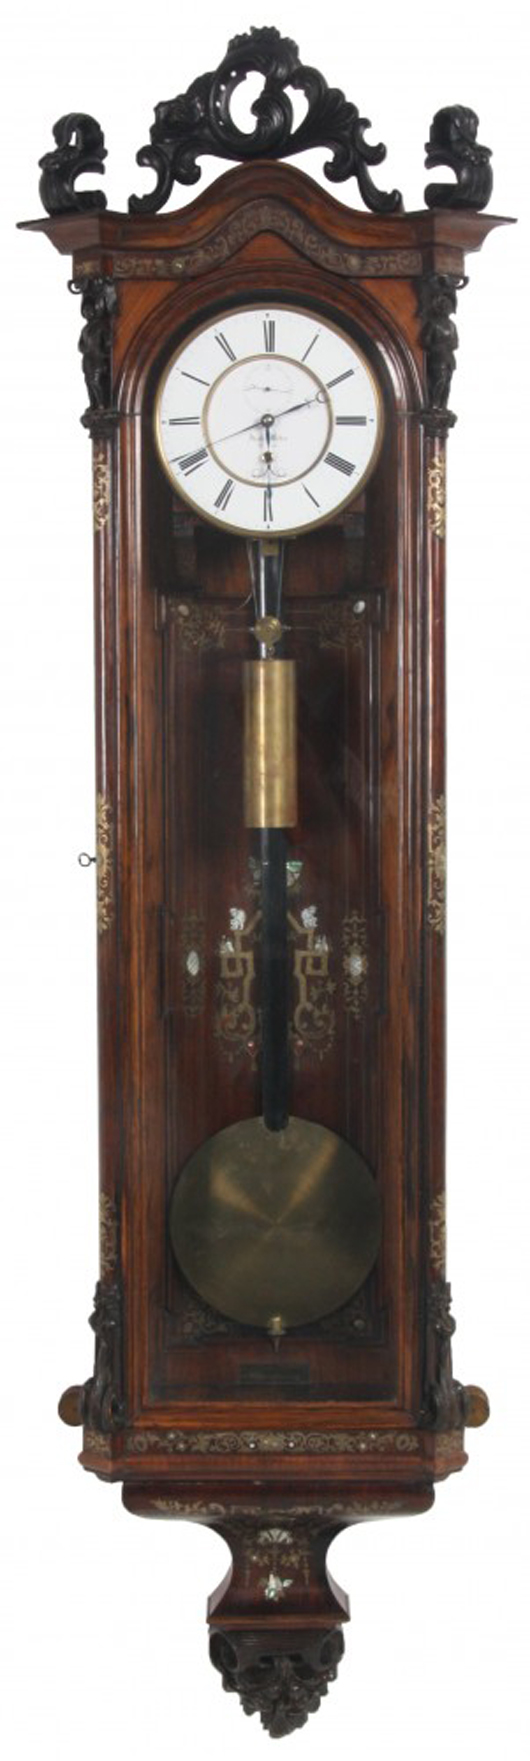 Inlaid rosewood Vienna regulator, 73 inches tall, with black Roman numerals and dial signed ‘Jacob Weber’ (est. $20,000-$25,000). Fontaine’s Auction Gallery image.